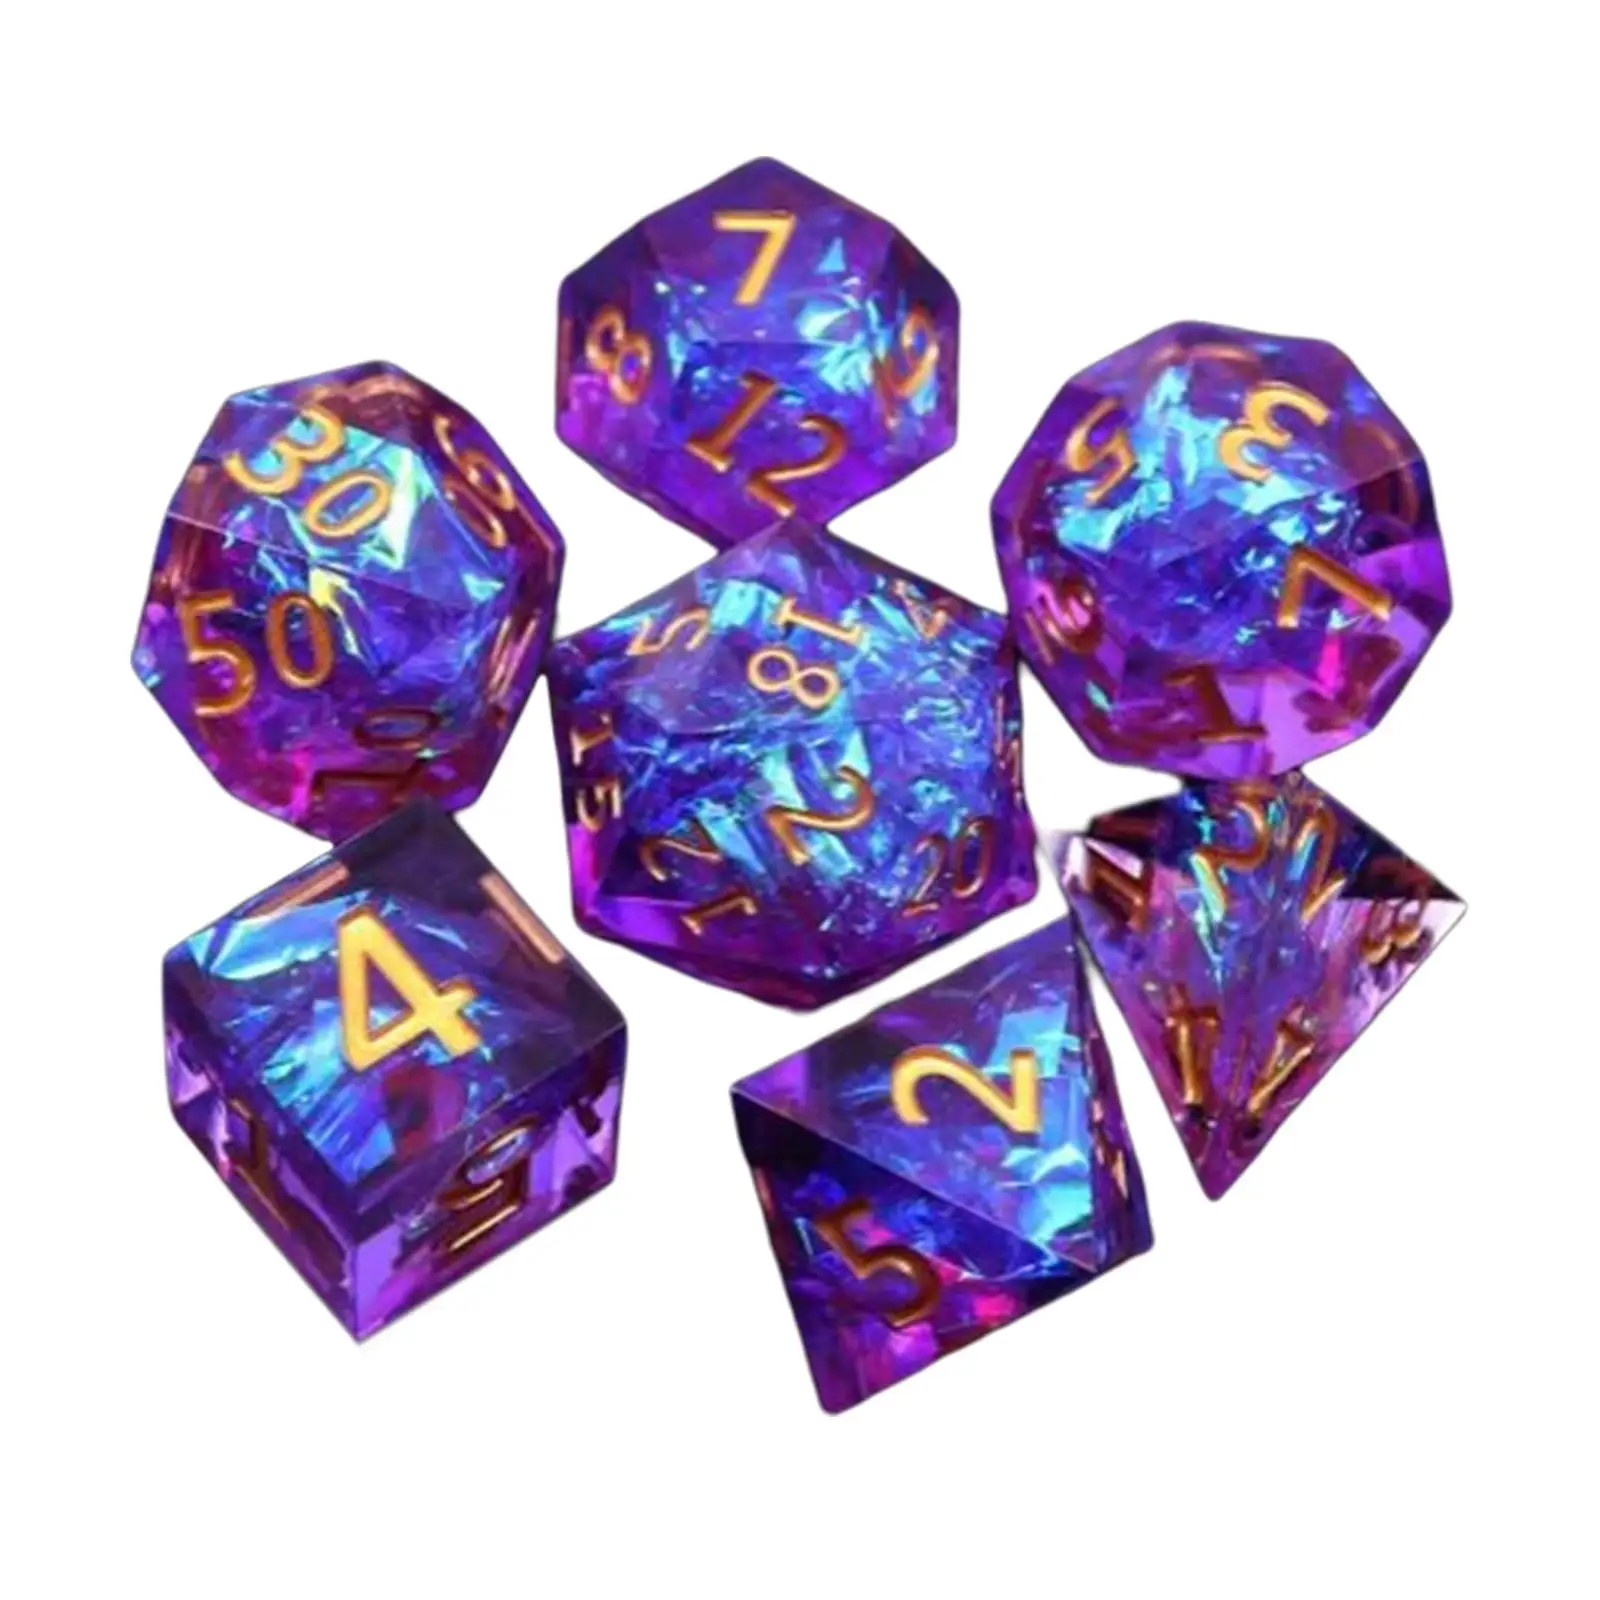 7x Multi-sided Zinc Alloy for Dragon Scales DND D&D PATHFINDERS RPG Dices